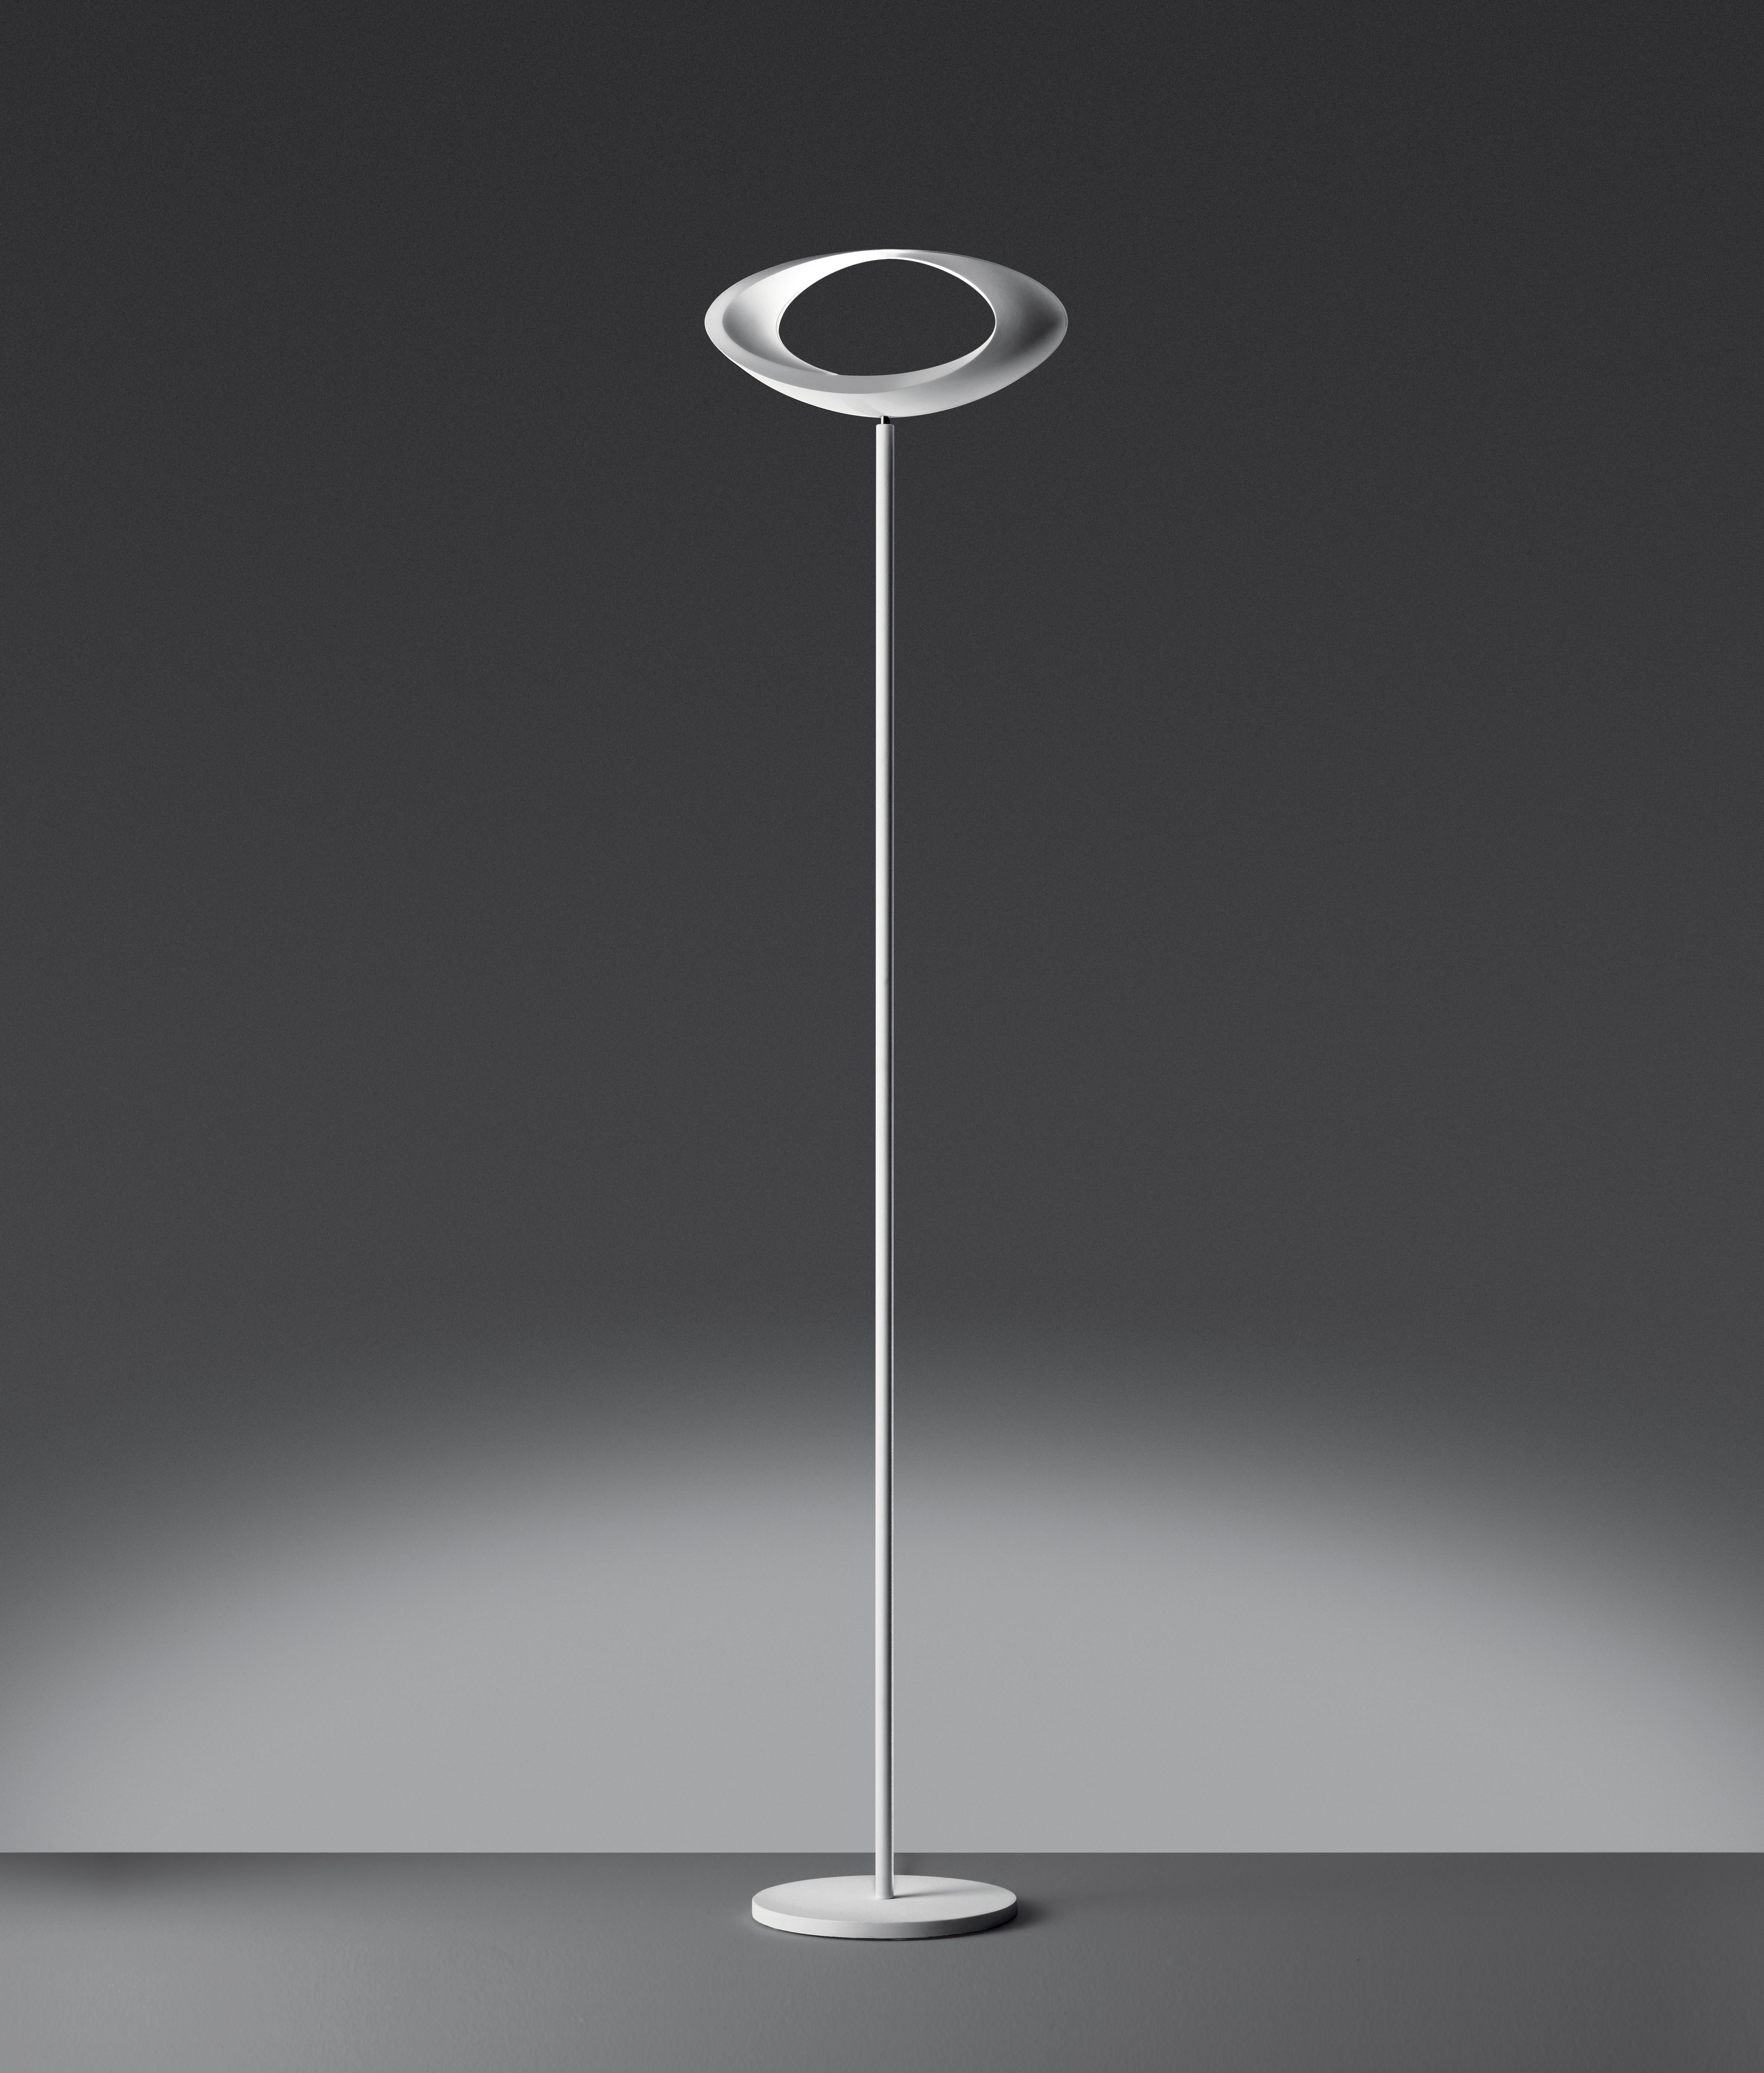 Giving the illusion of a watchful eye, Cabildo is a simple design which provides subtle yet powerful light. White, painted die-cast aluminum body on a steel base. Cabildo is available in floor, wall and suspension.

Integrated light source. Only